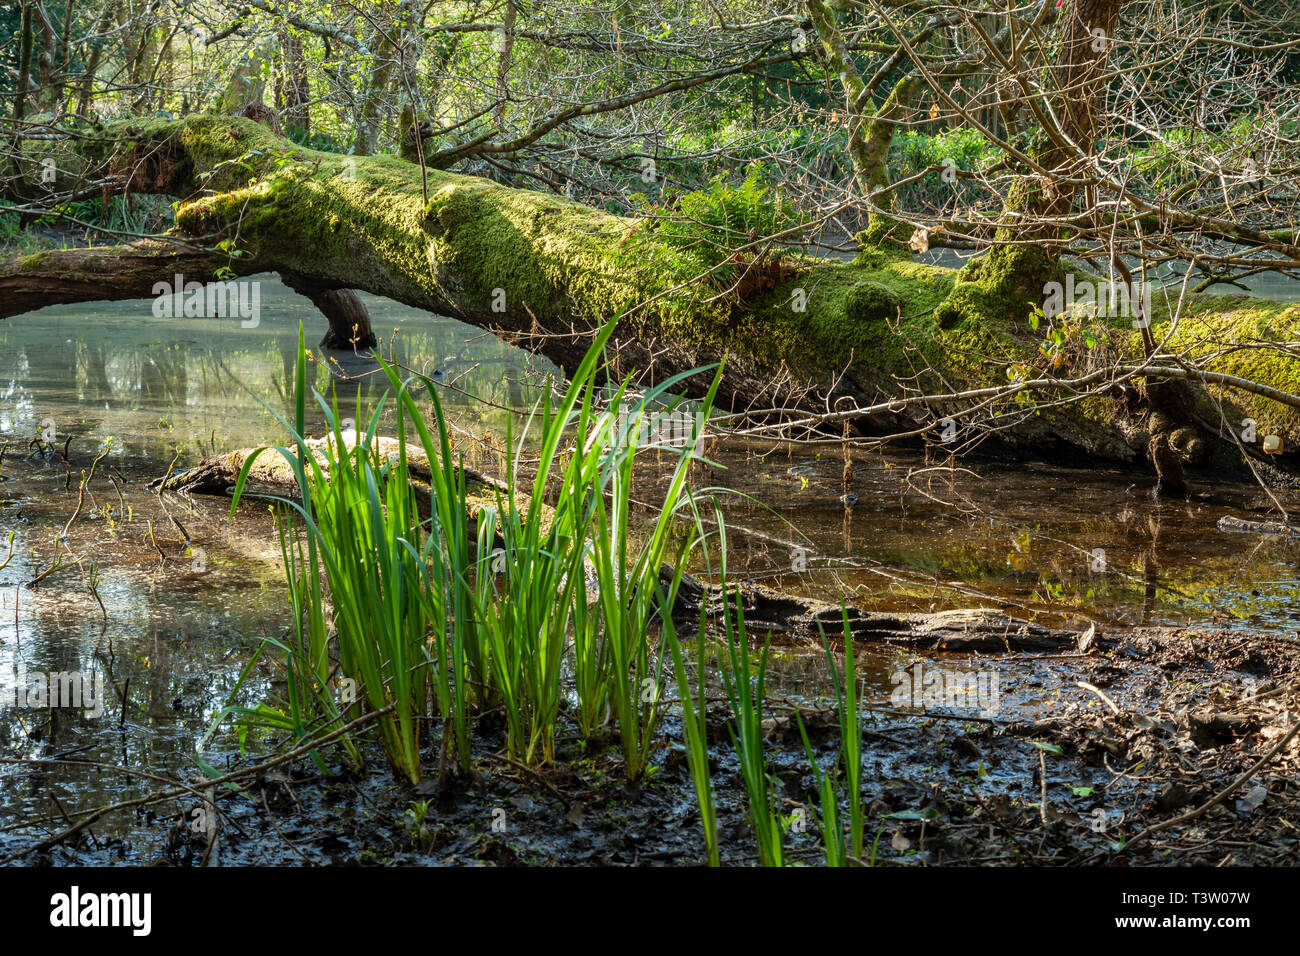 Spring morning in Binsted Woods, West Sussex, England. Stock Photo